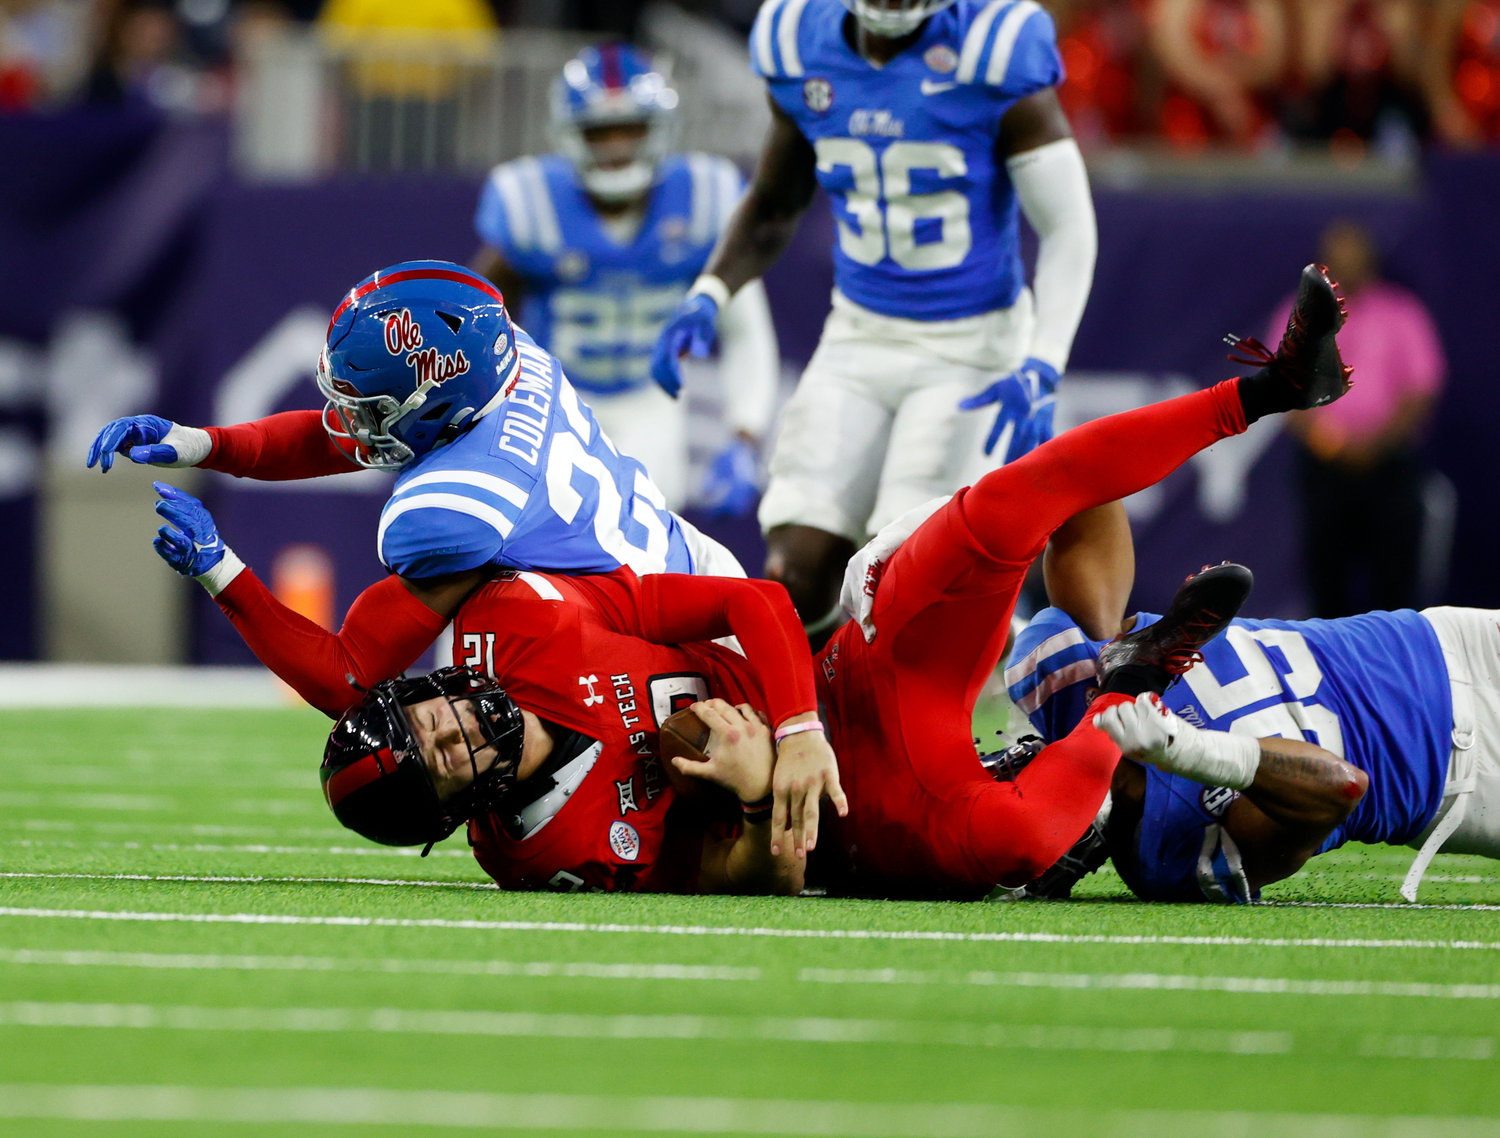 Mississippi defensive end Tavius Robinson (95) and linebacker Khari Coleman (23) tackle Texas Tech quarterback Tyler Shough (12) for a loss during the TaxAct Texas Bowl on Dec. 28, 2022 in Houston.